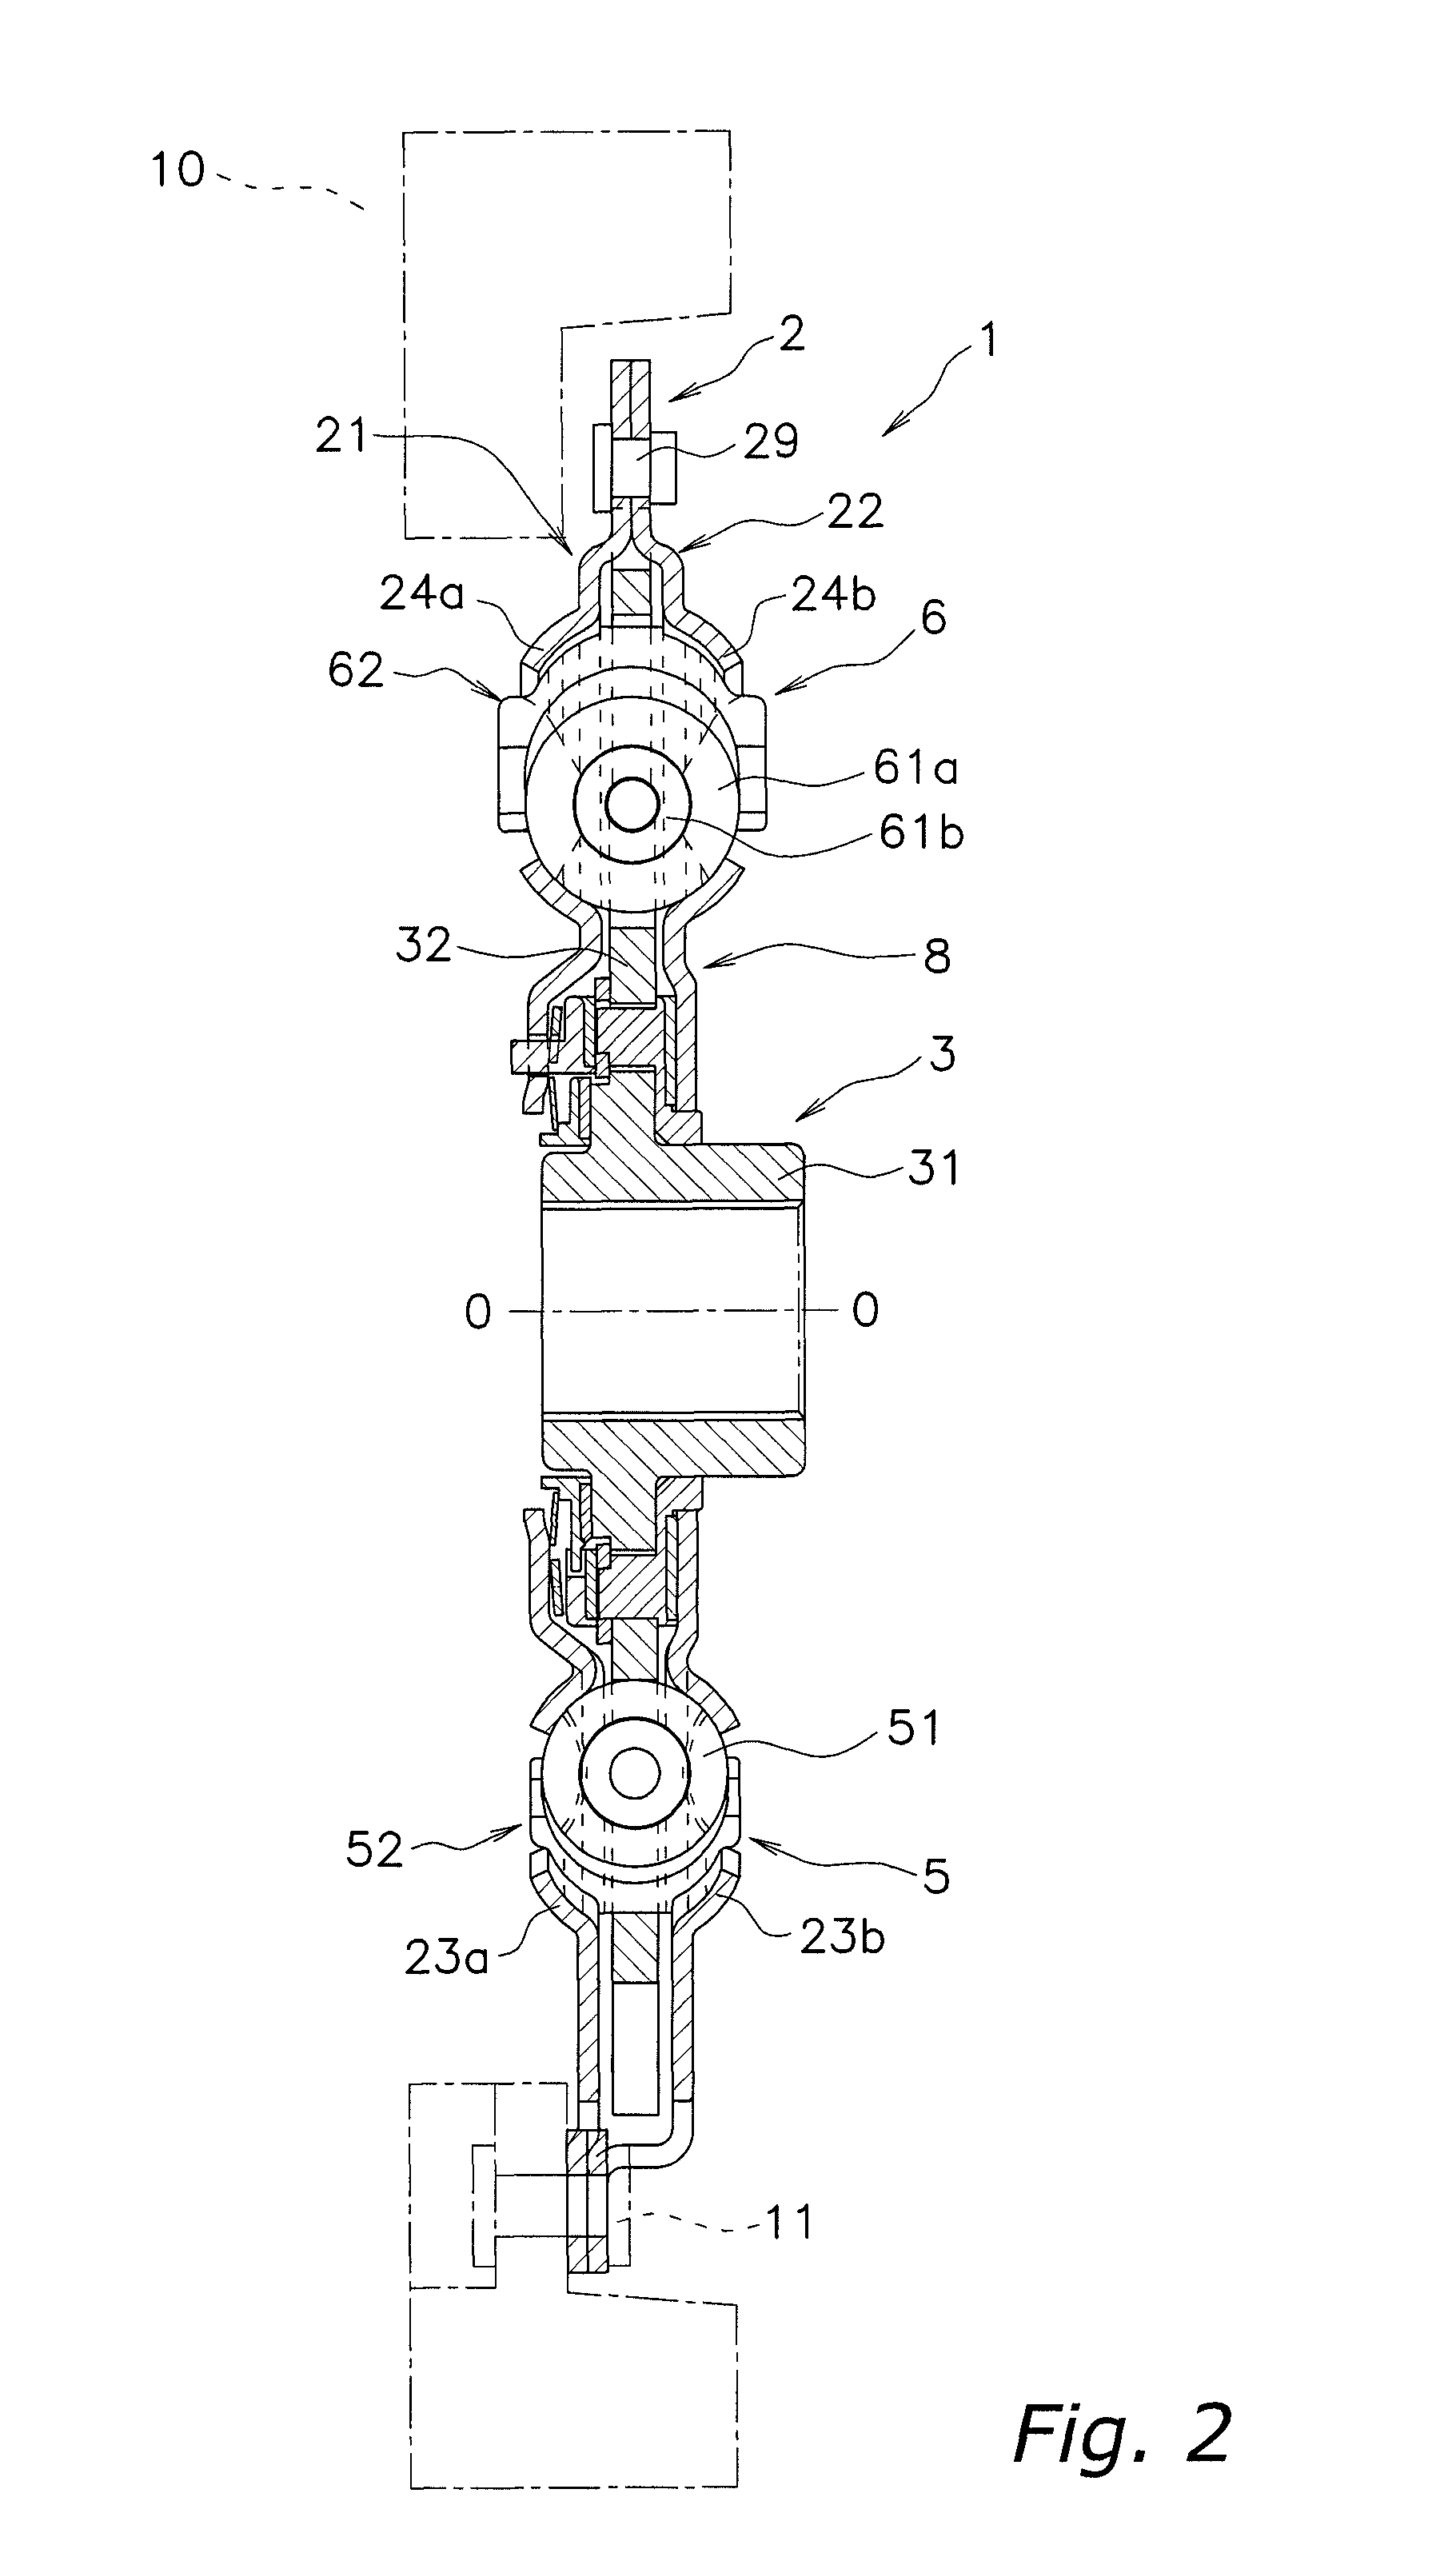 Spring seat and damper disk assembly